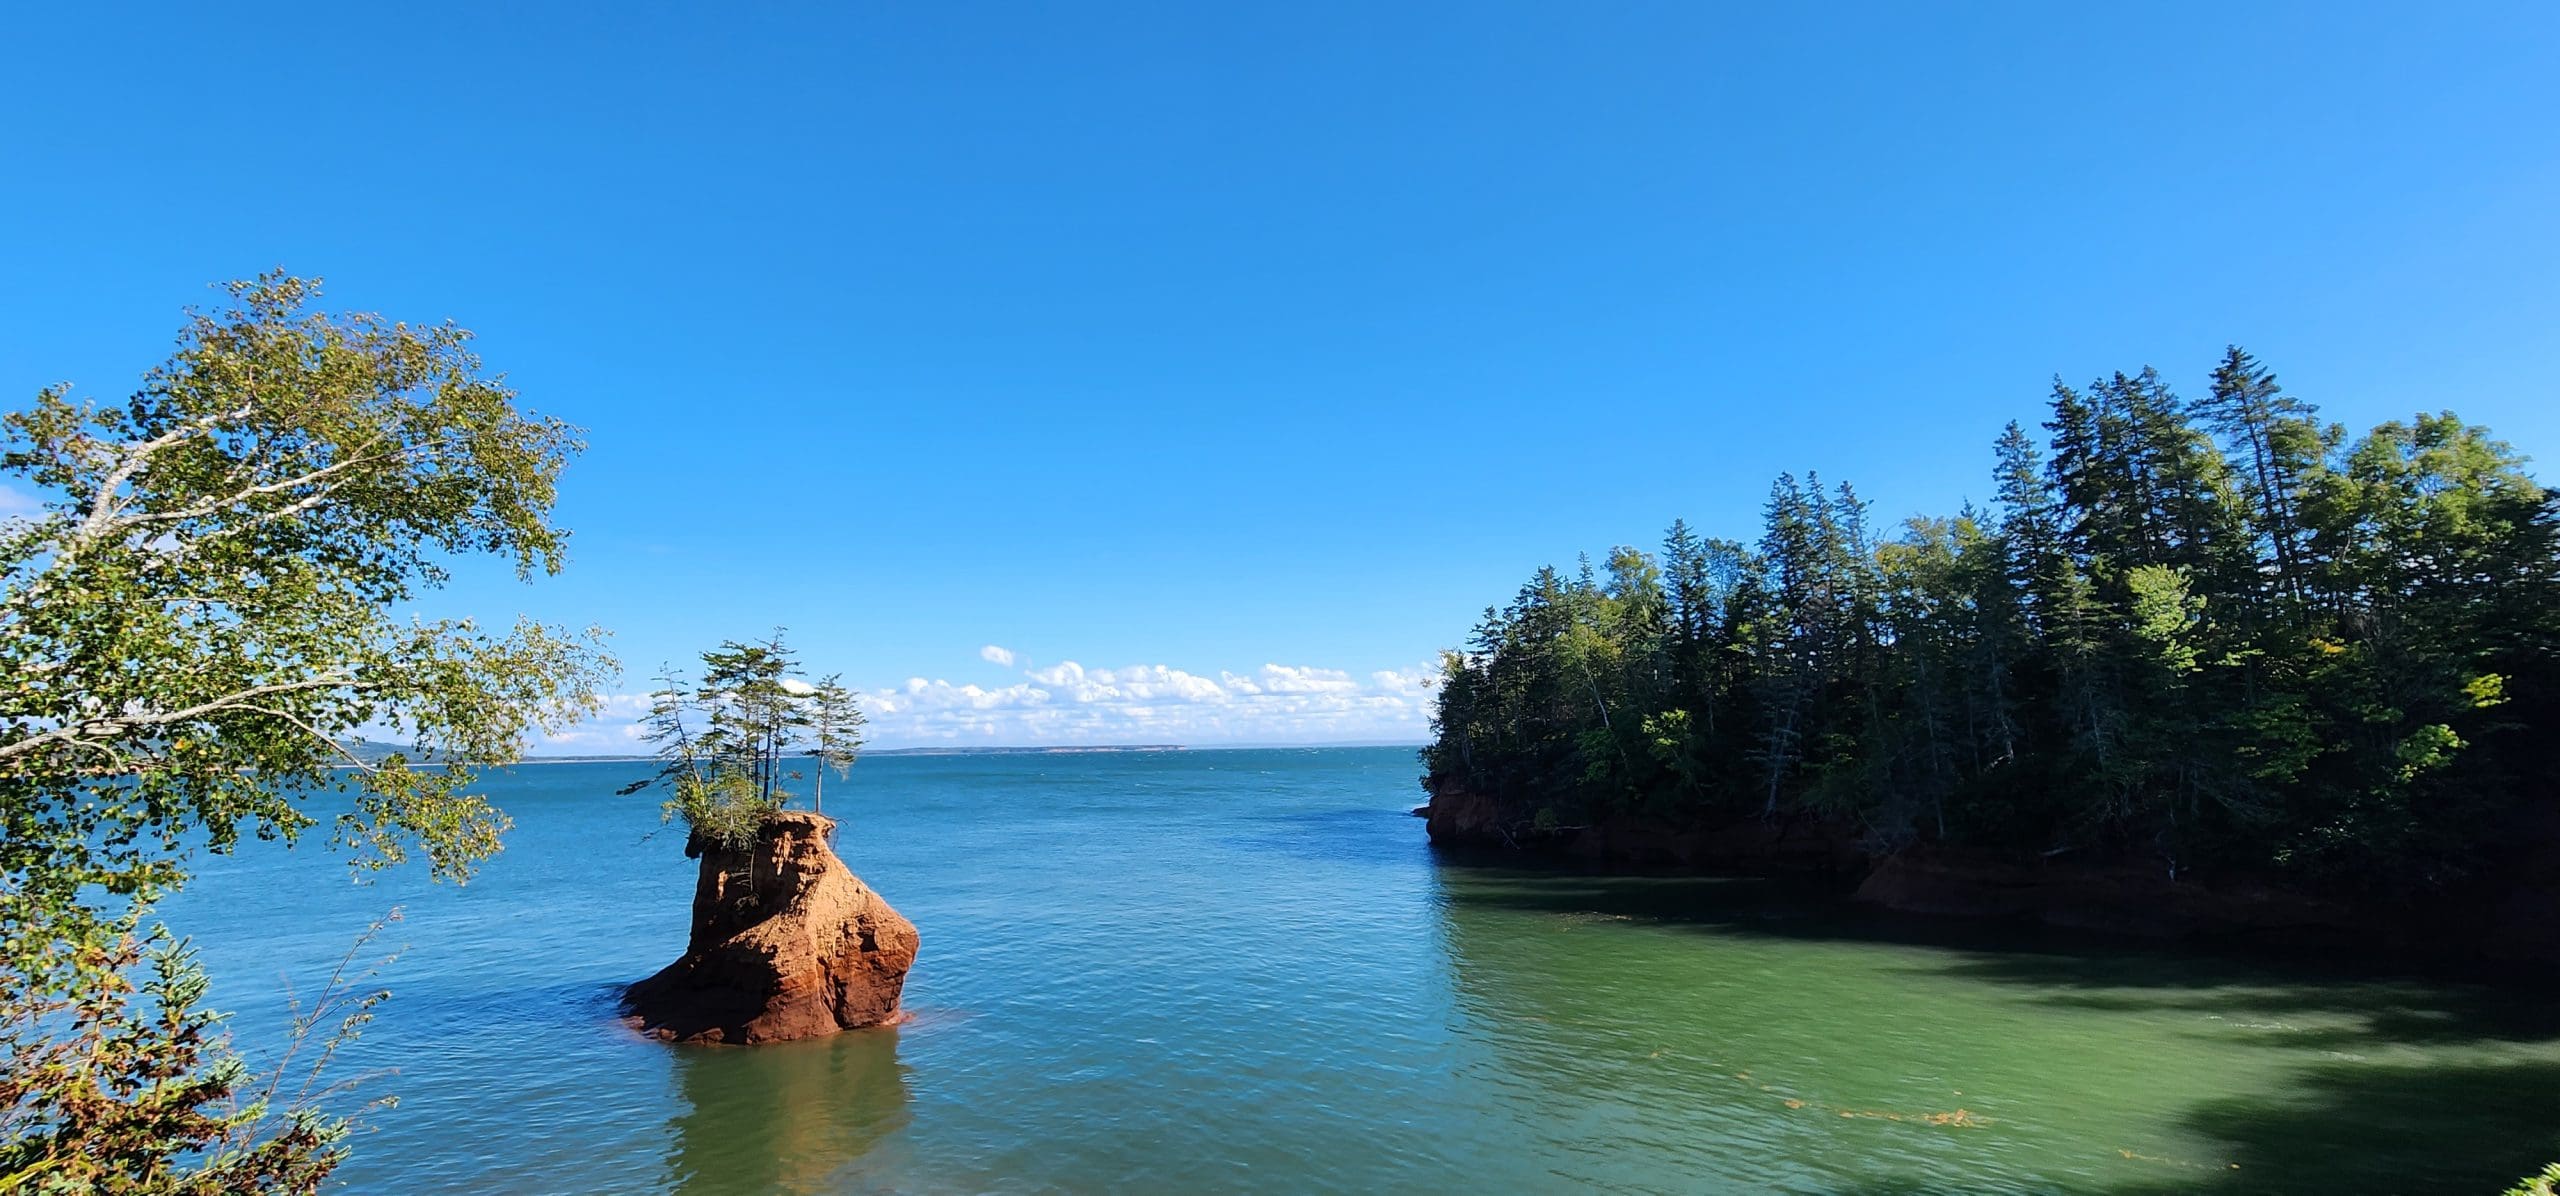 Bay of Fundy Travel Guide